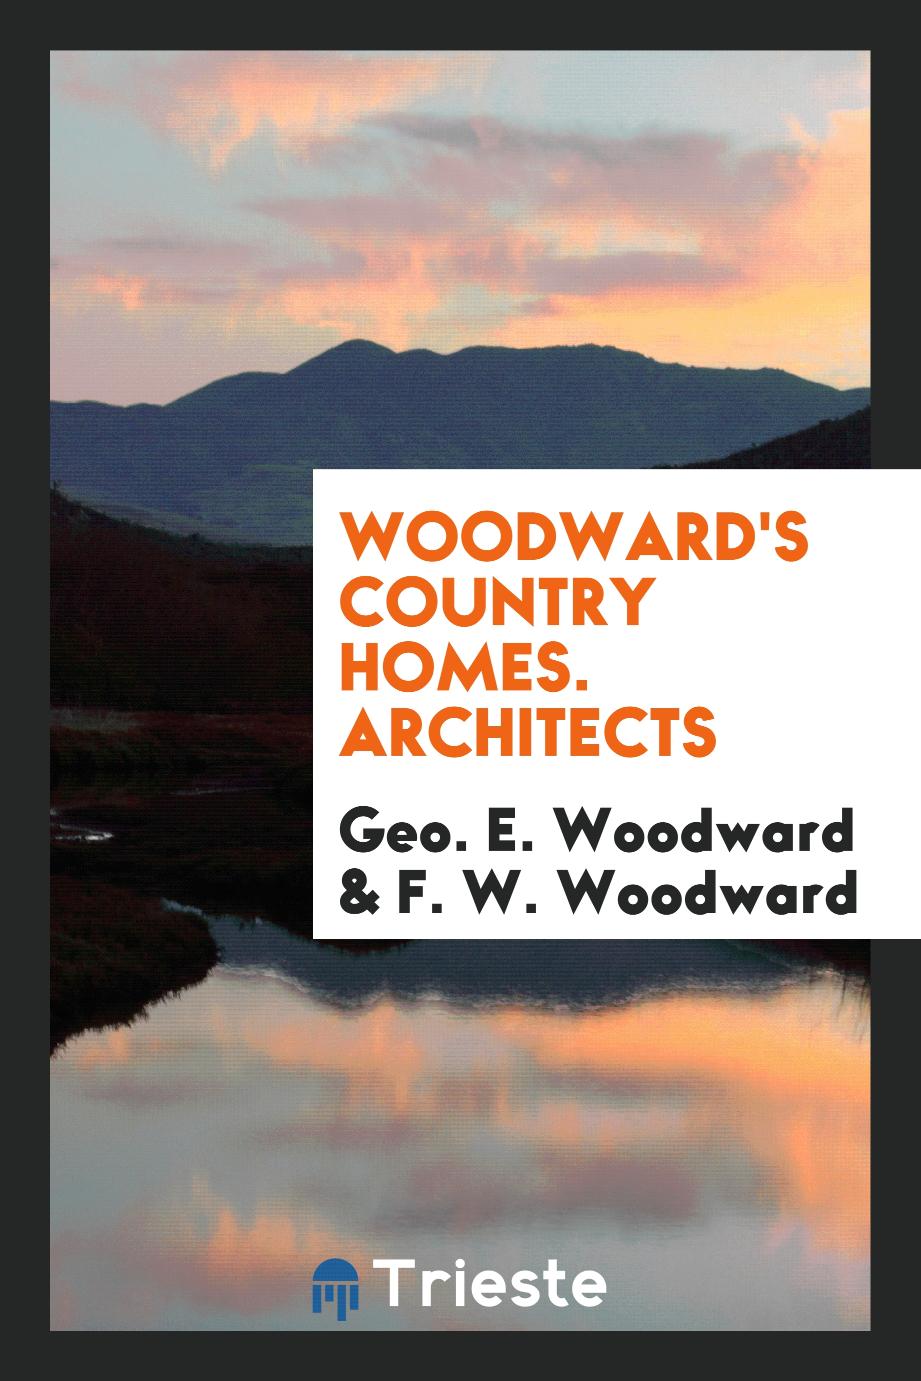 Woodward's Country Homes. Architects